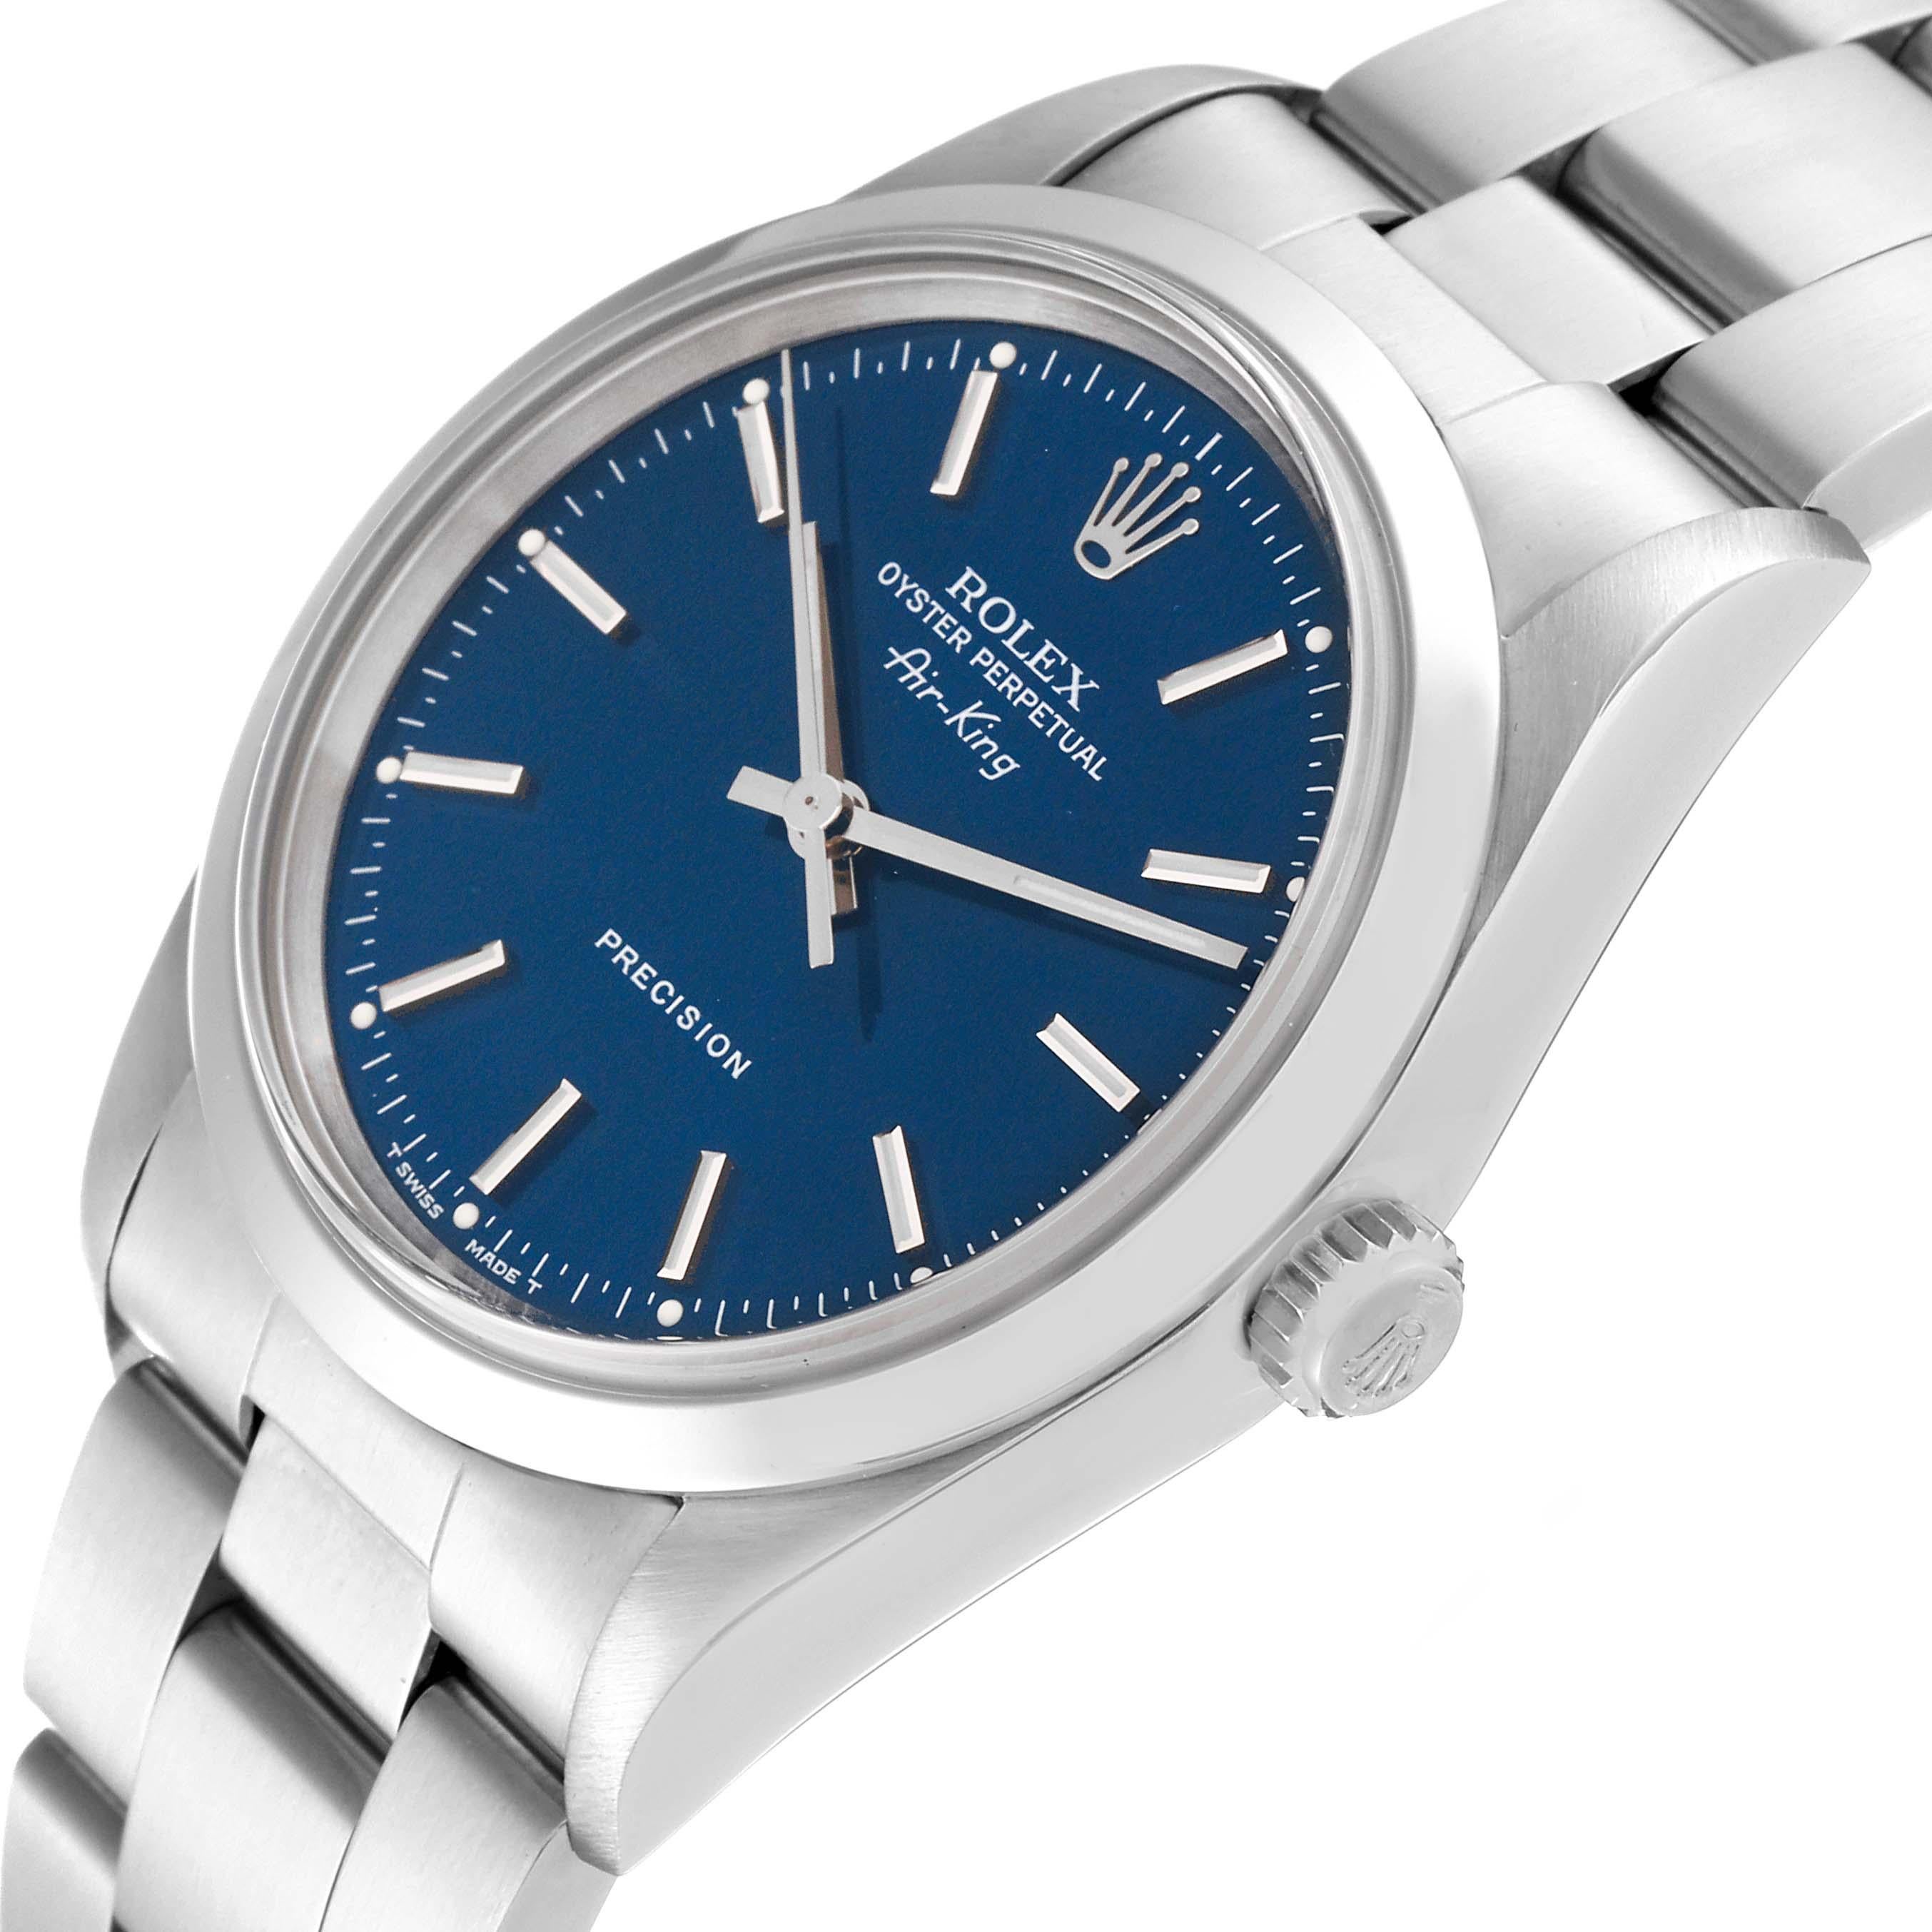 Rolex Air King Blue Dial Smooth Bezel Steel Mens Watch 14000 Papers. Automatic self-winding movement. Stainless steel case 34 mm in diameter. Rolex logo on the crown. Stainless steel smooth bezel. Scratch resistant sapphire crystal. Blue dial with